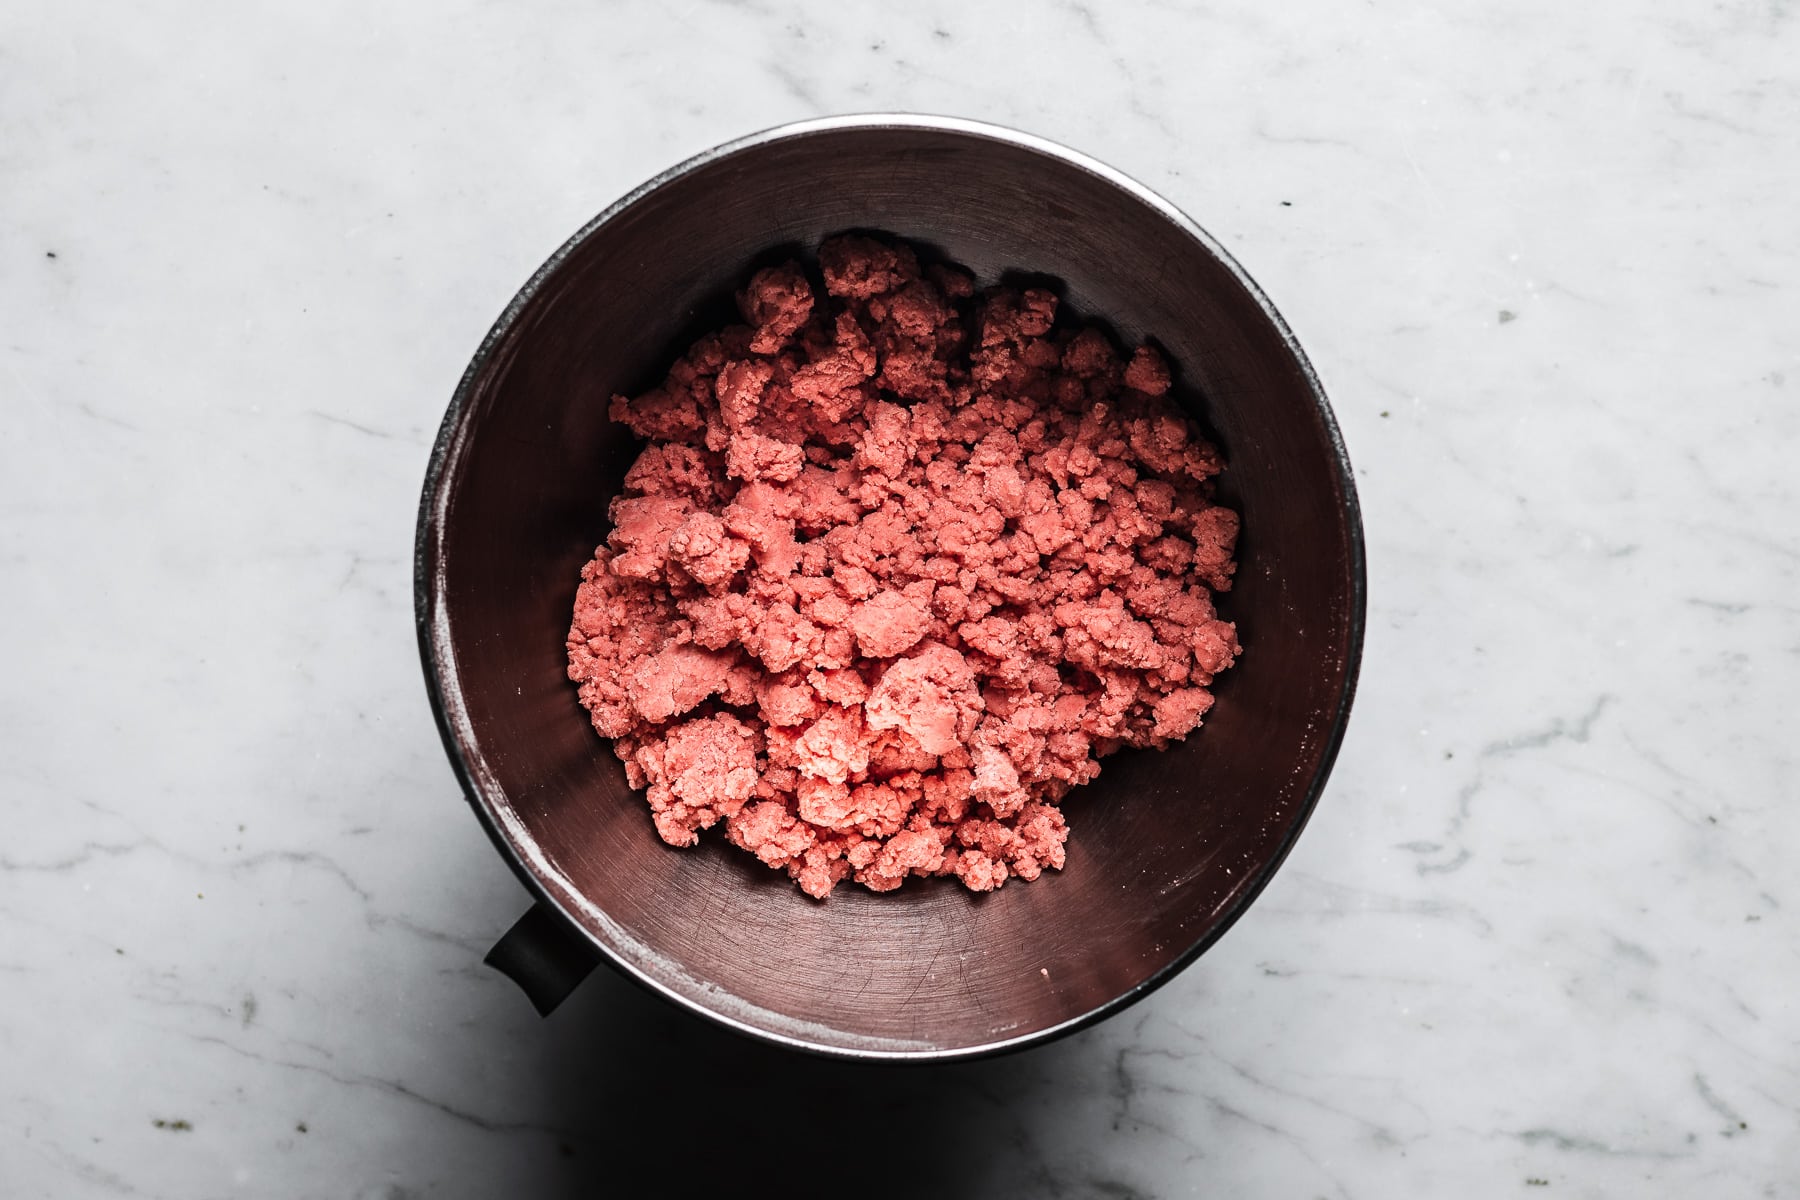 A process photo showing pink shortbread dough in a metal mixing bowl, resting on a light grey marble surface.